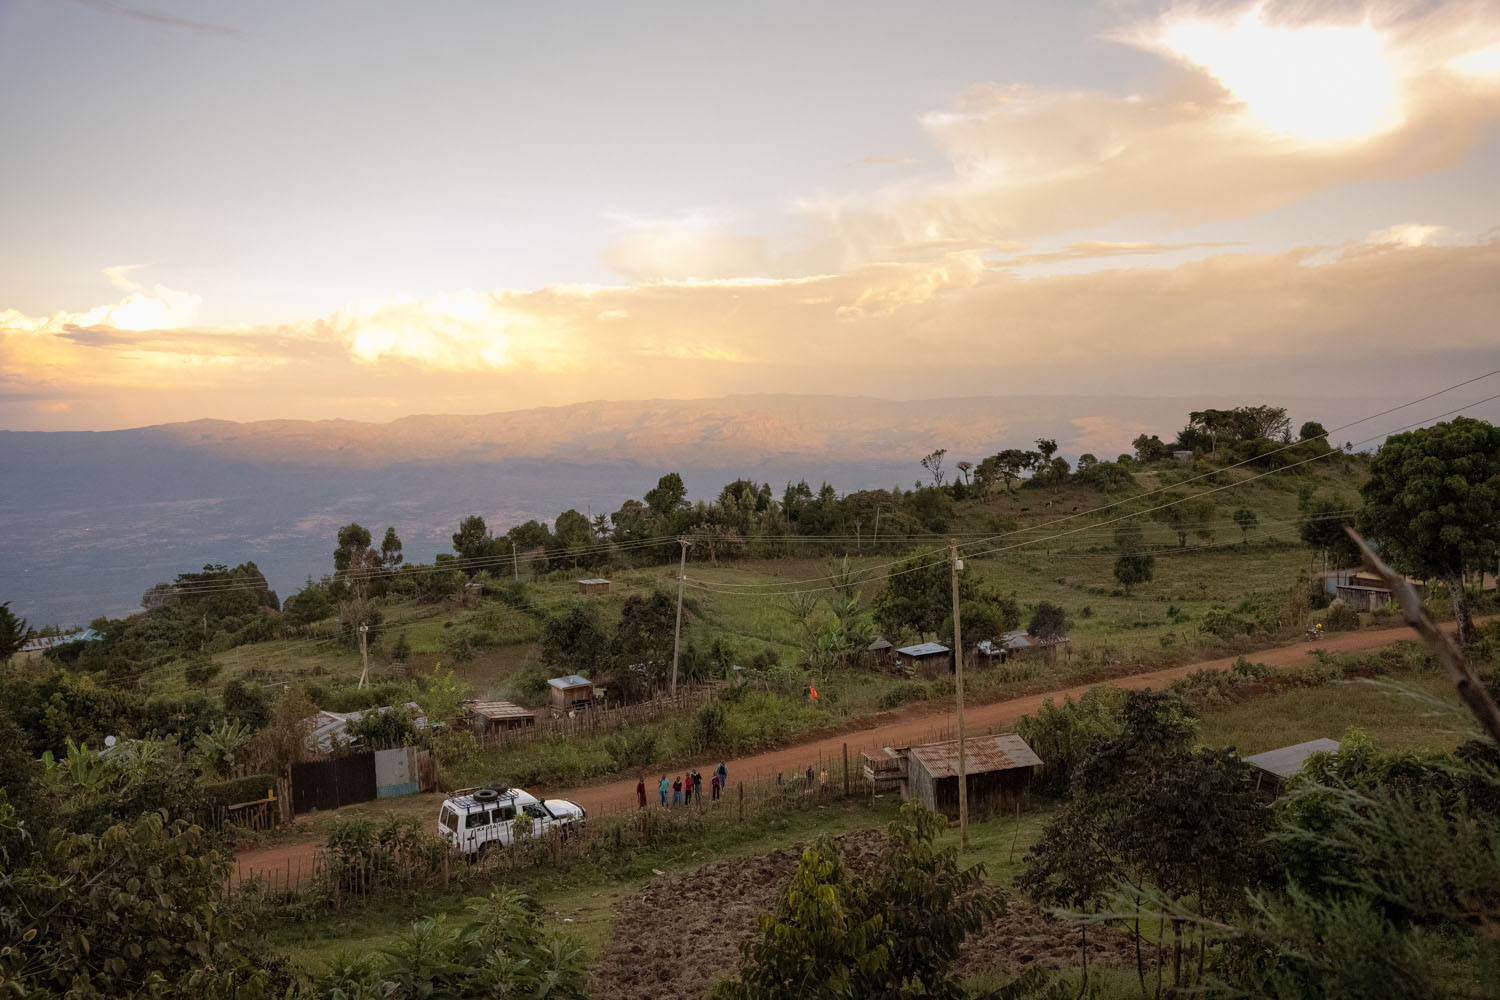 The sun rises over Kenya’s Rift Valley, with a few Kenyans gathered on the road below. 